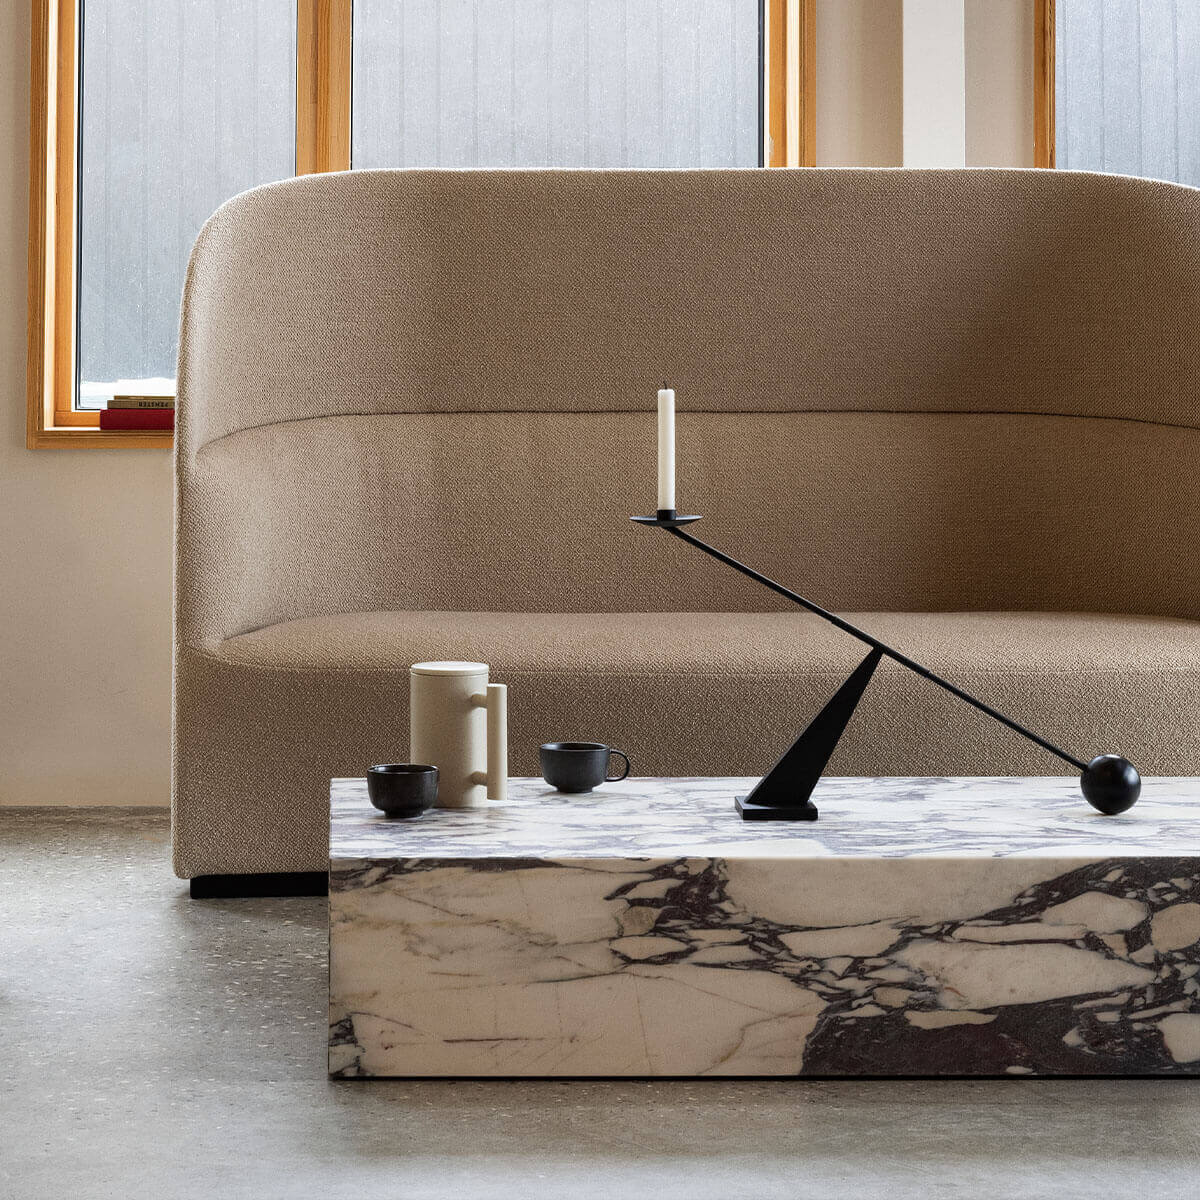 Plinth Coffee Table by Norm Architects for Audo Copenhagen